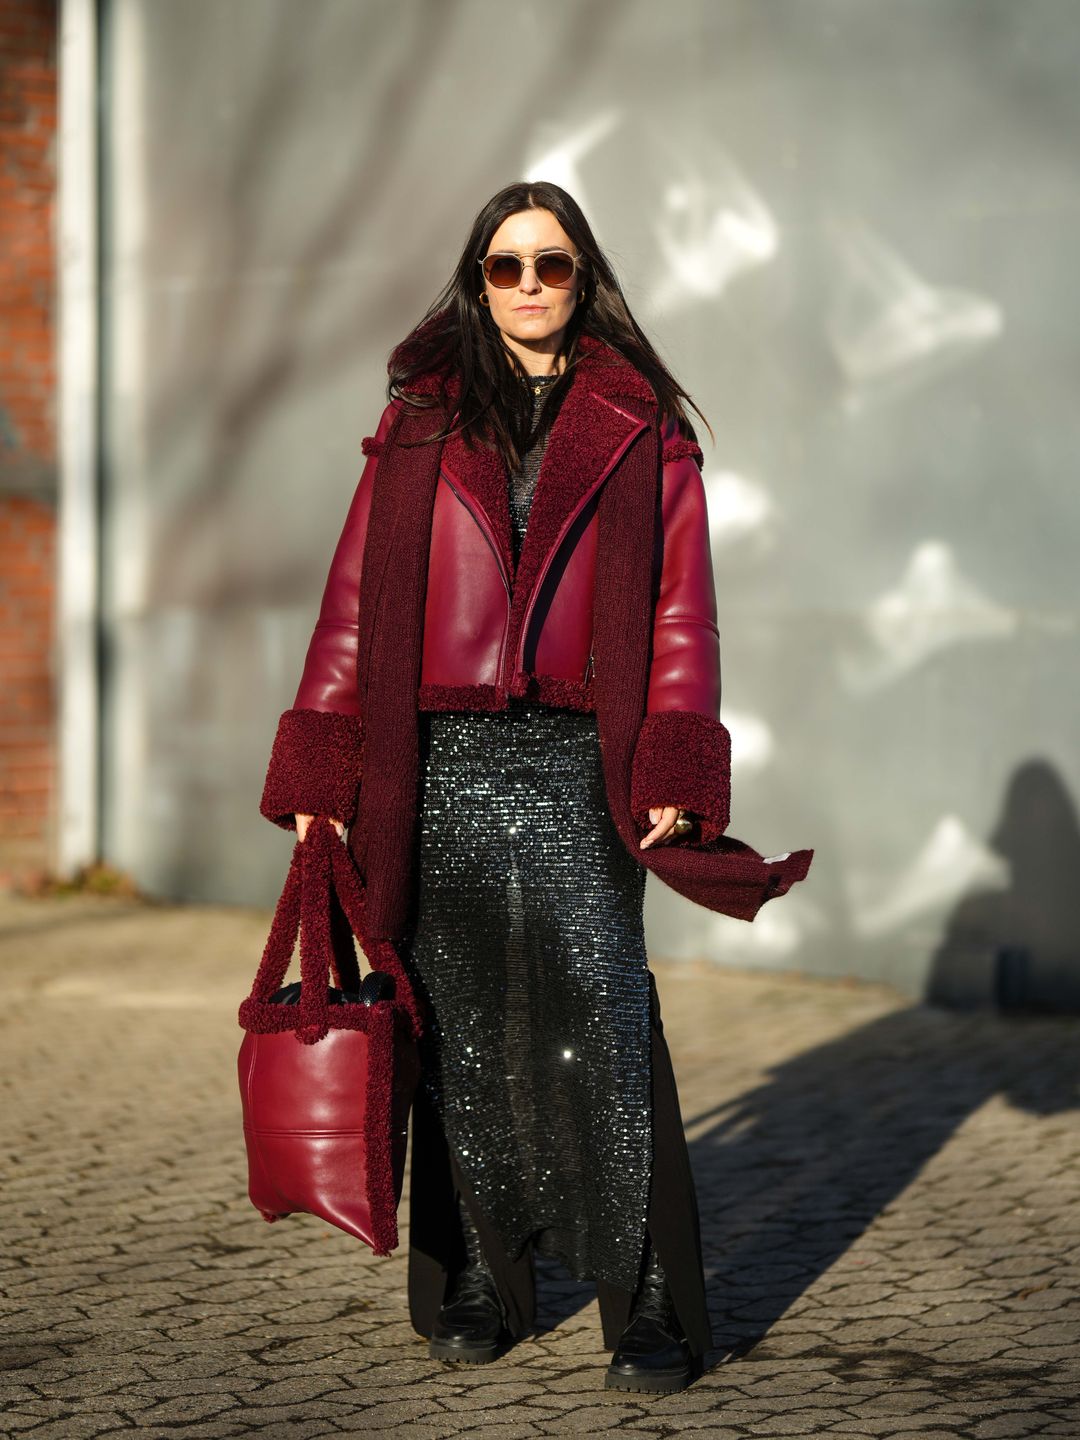 The Stylish 7 Winter Travel Outfits For Your Next Trip